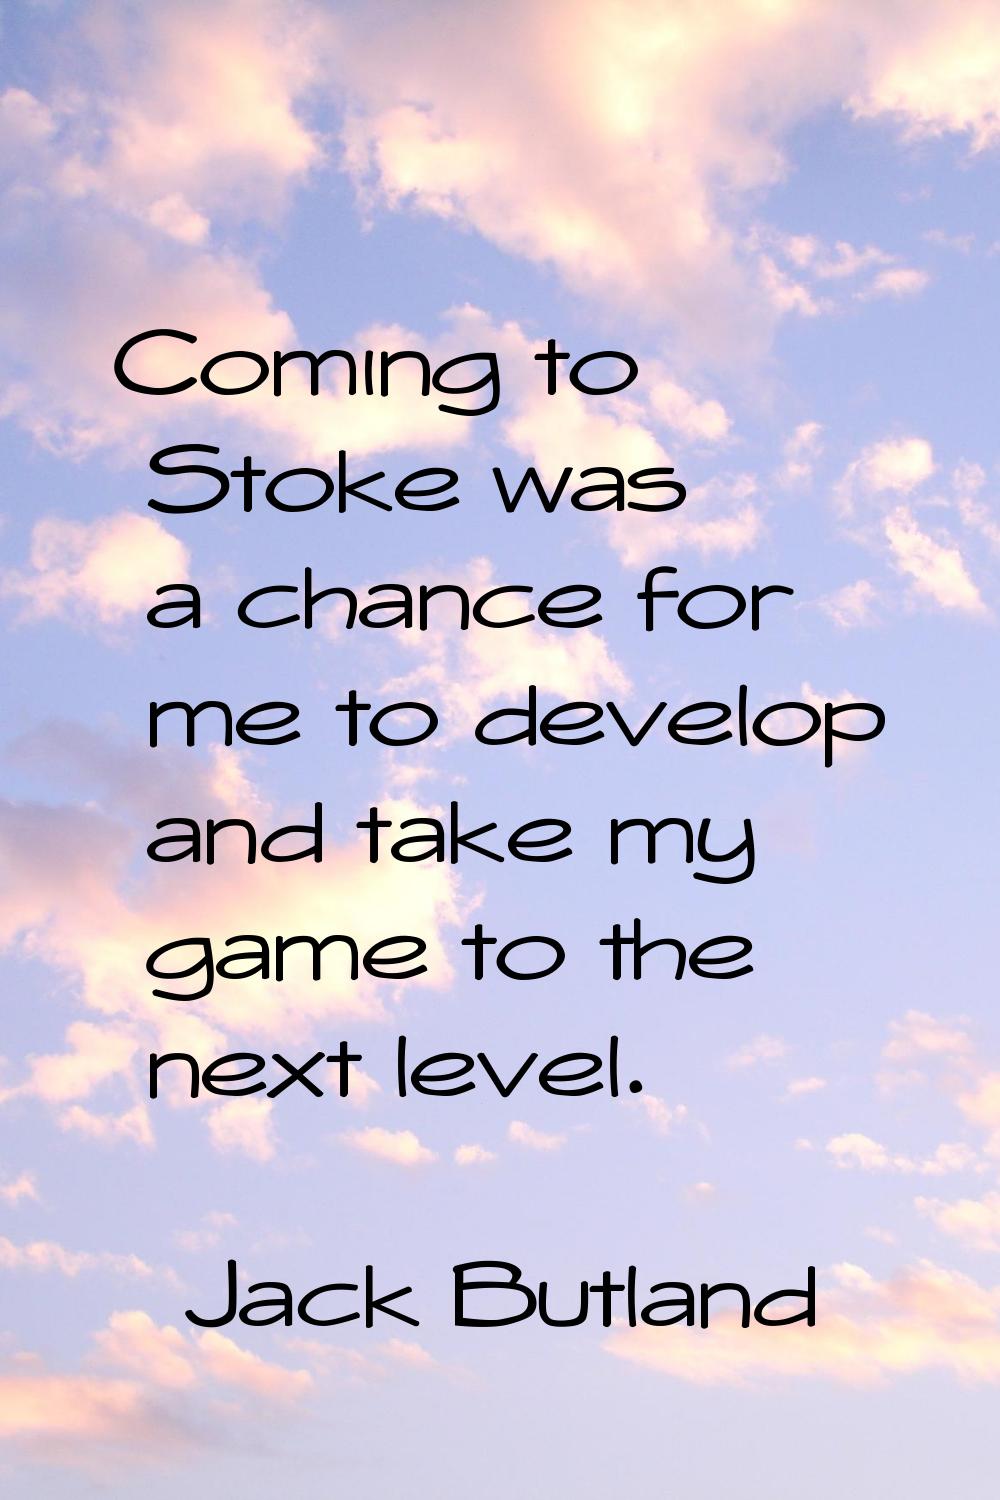 Coming to Stoke was a chance for me to develop and take my game to the next level.